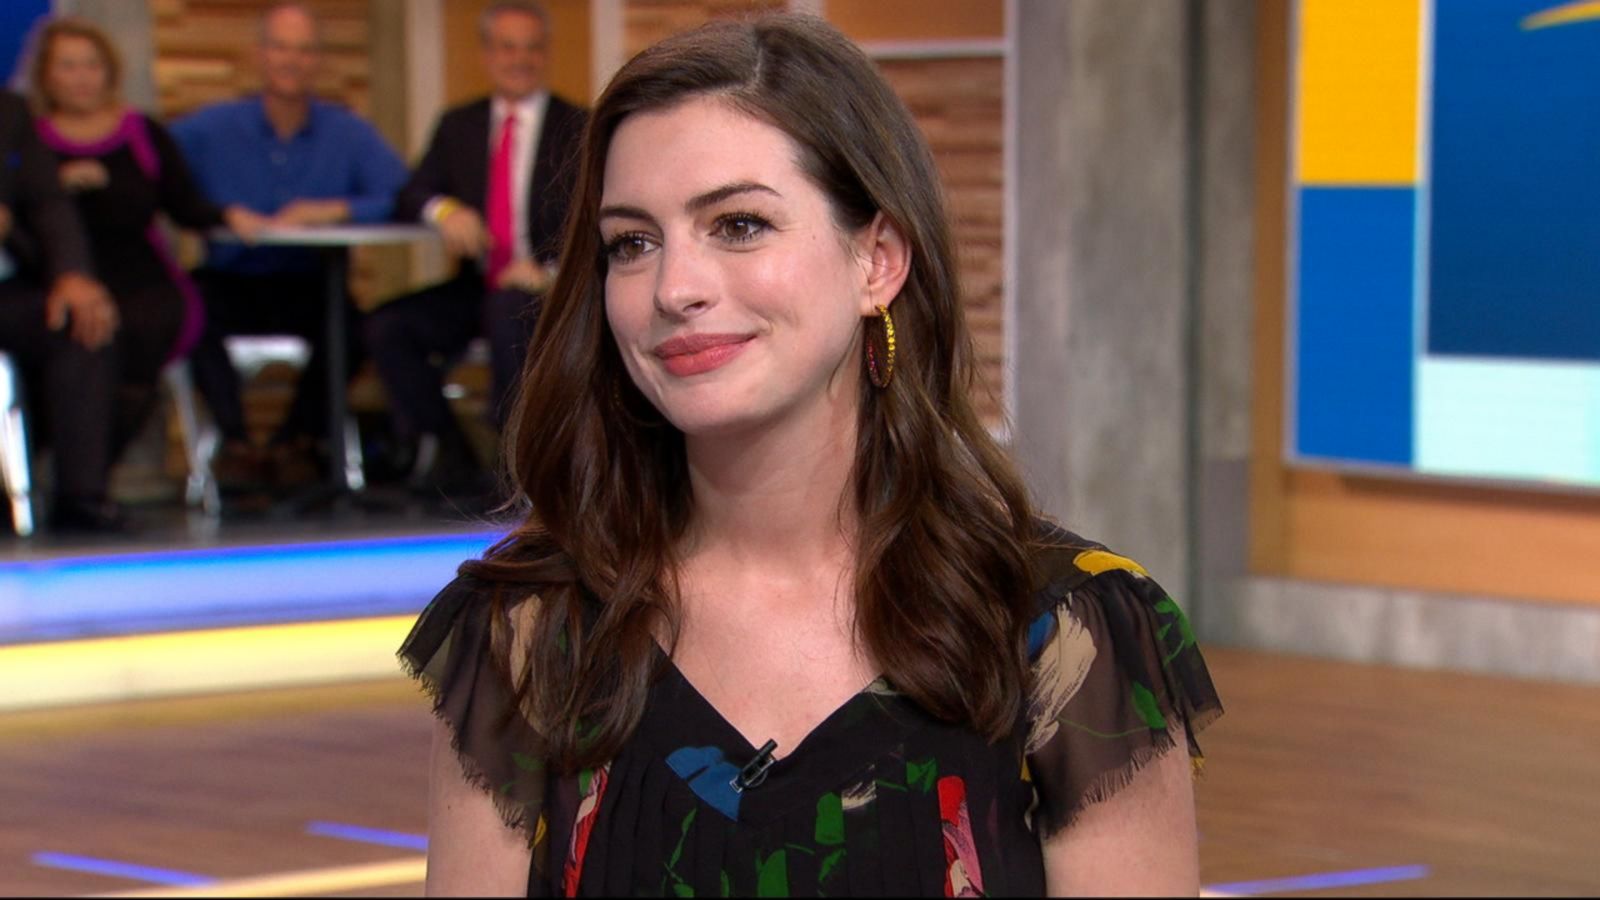 Anne Hathaway dishes on her $15 flea market dress - Good Morning America